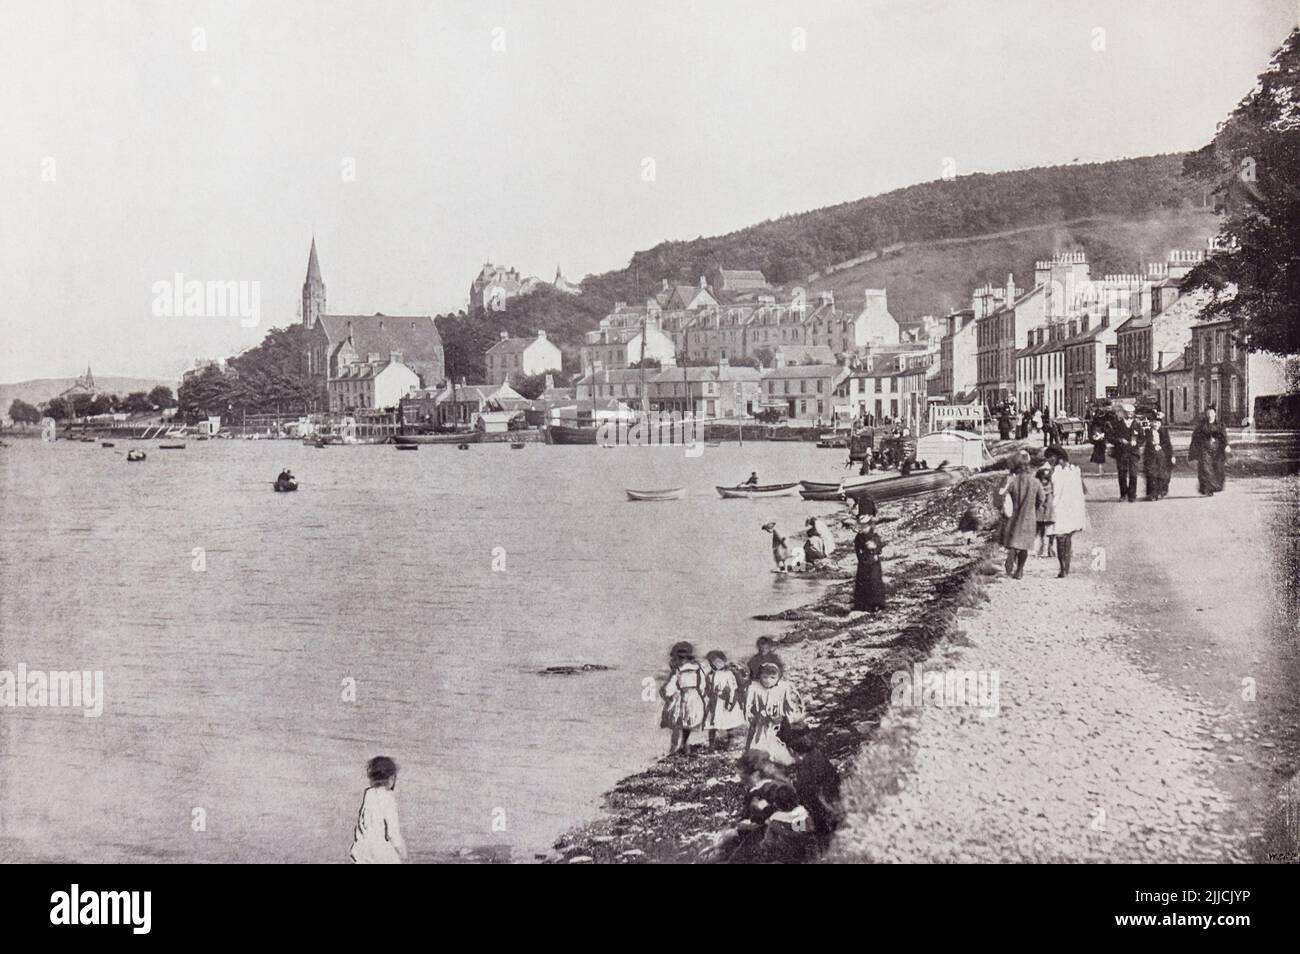 Port Bannatyne, Isle of Bute, Firth of Clyde, Scotland, seen here in the 19th century.   From Around The Coast,  An Album of Pictures from Photographs of the Chief Seaside Places of Interest in Great Britain and Ireland published London, 1895, by George Newnes Limited. Stock Photo